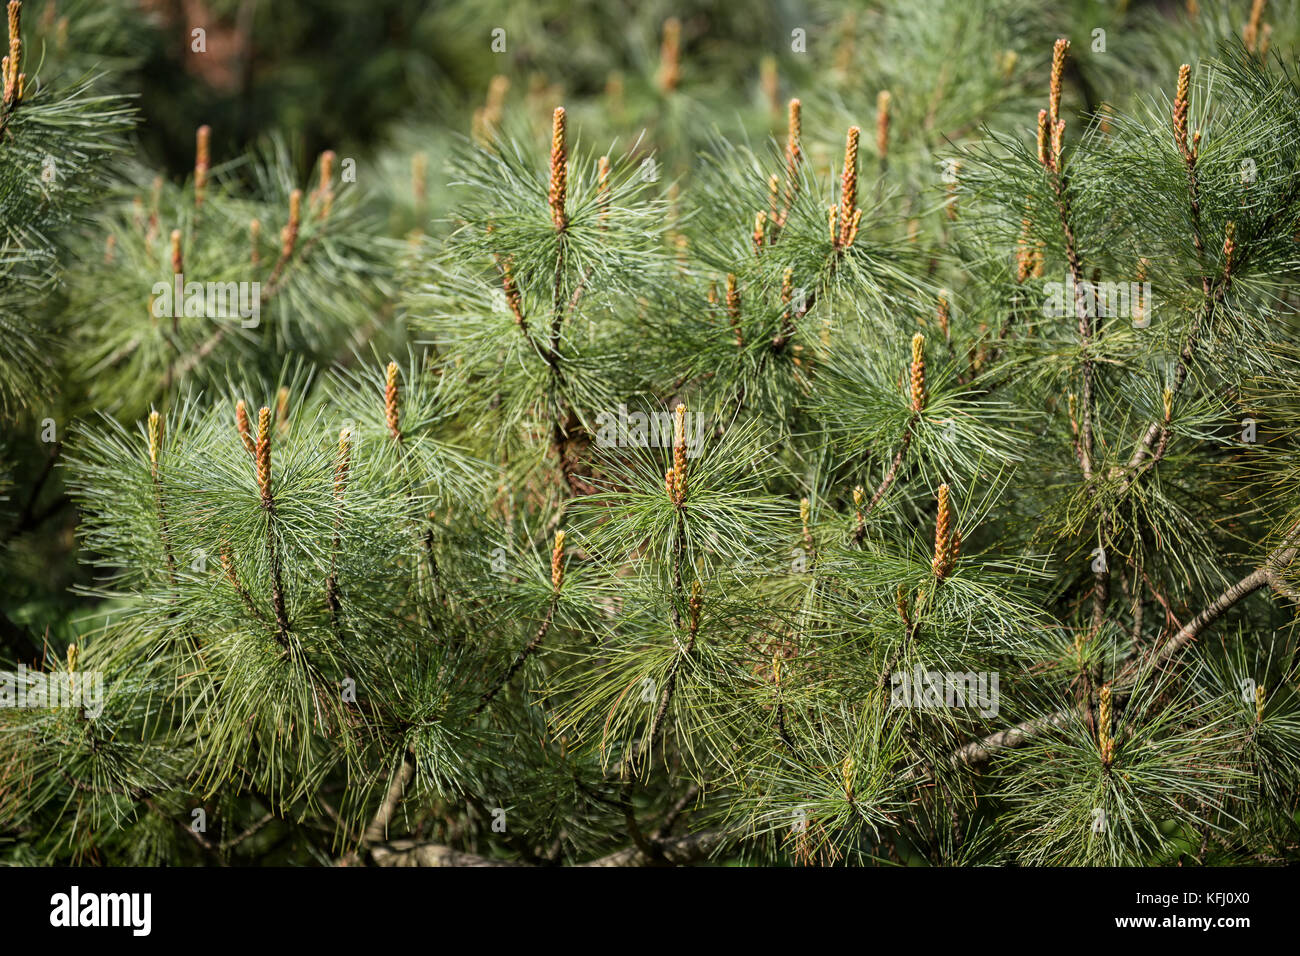 Siberian dwarf pine (Pinus pumila) with young shoots in spring Stock Photo